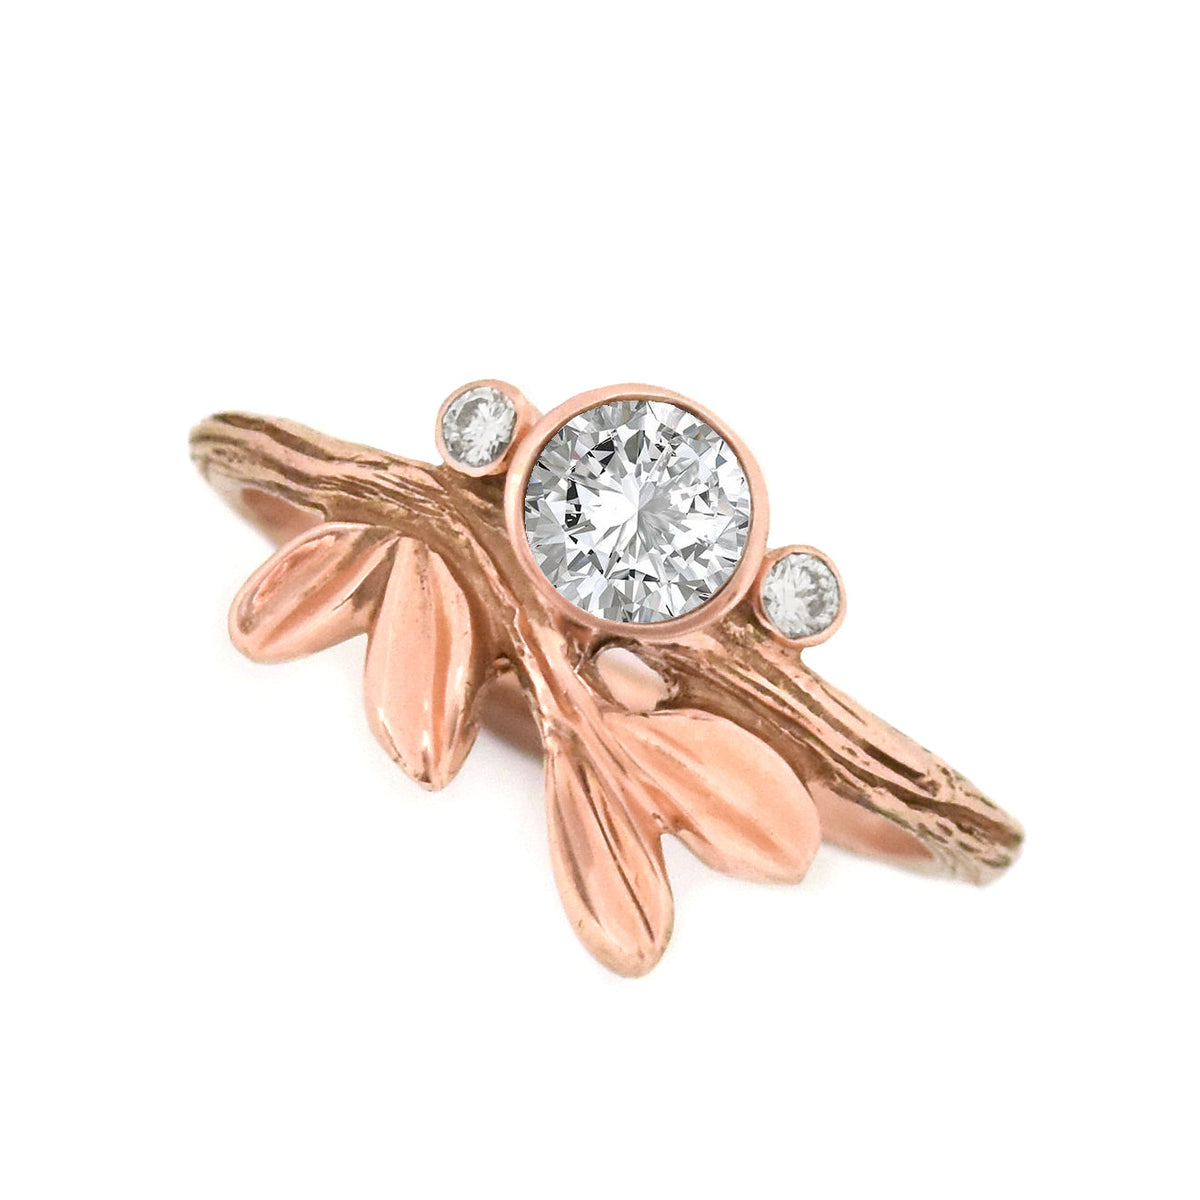 Gold Growing Love Diamond Twig Ring - your choice of 5mm stone & gold - Wedding Ring Recycled Diamond / 14K Rose Gold Conflict Free Diamond / 14K Rose Gold 6309 - handmade by Beth Millner Jewelry